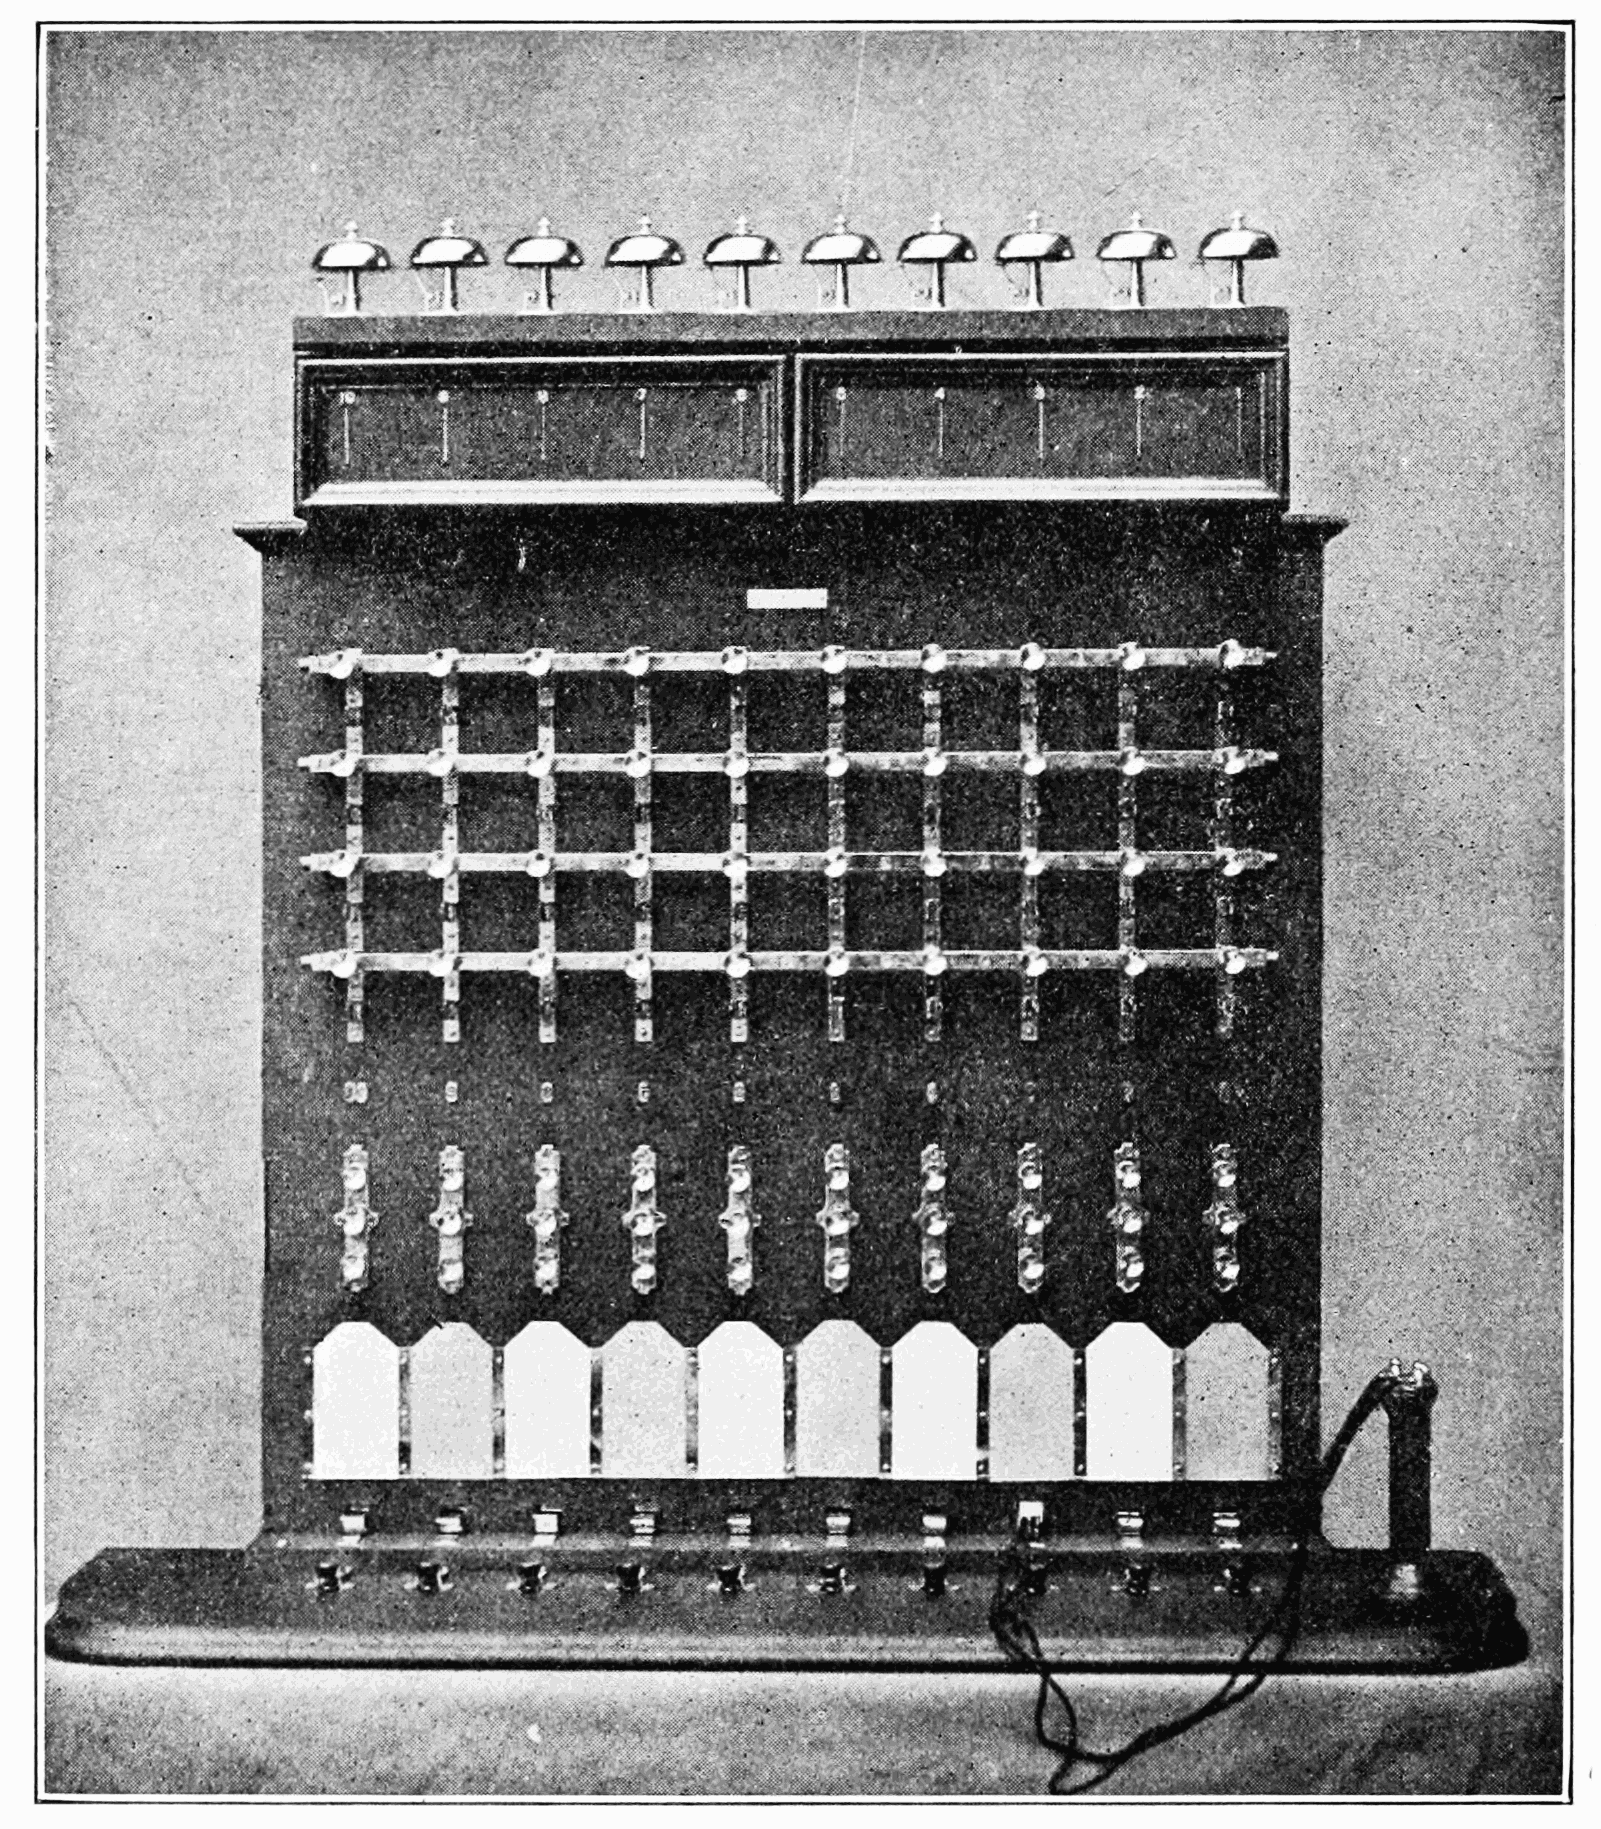 image 1907 forty wire telephone switchboard